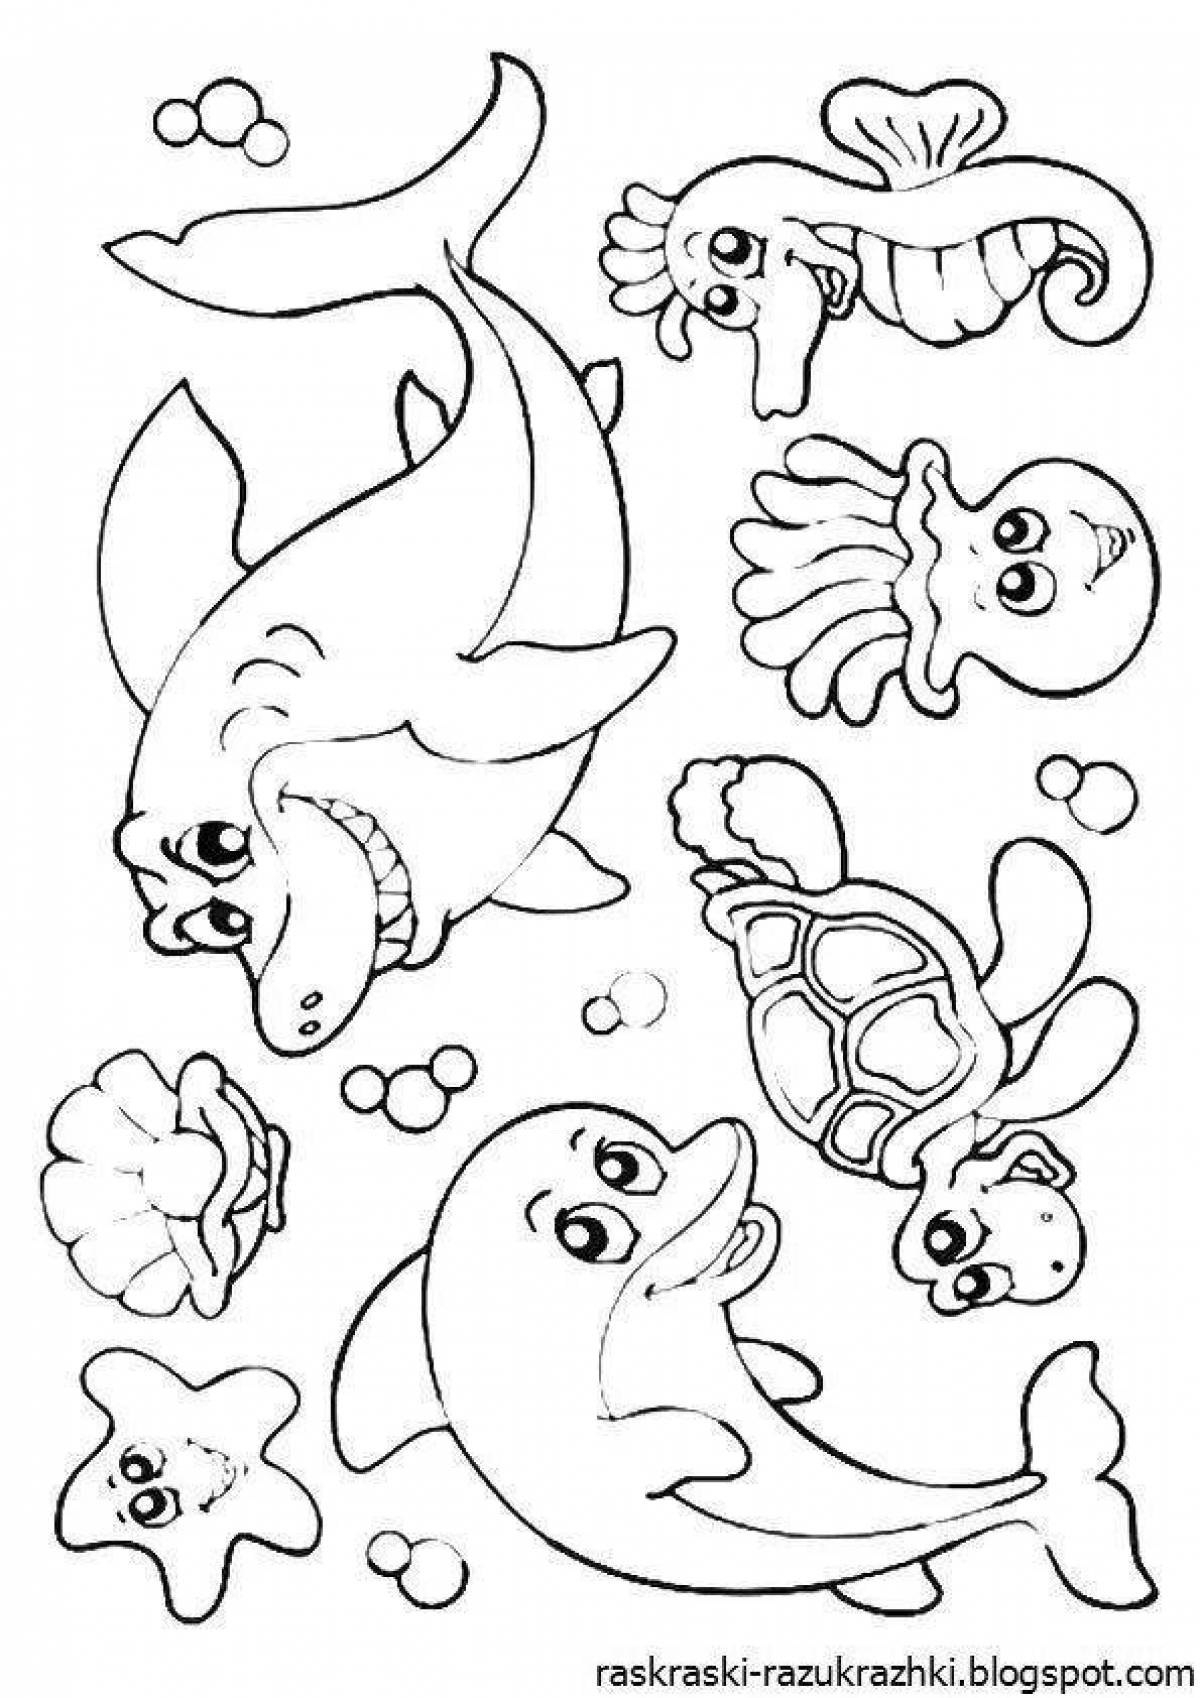 Glitter marine life coloring book for 5-6 year olds